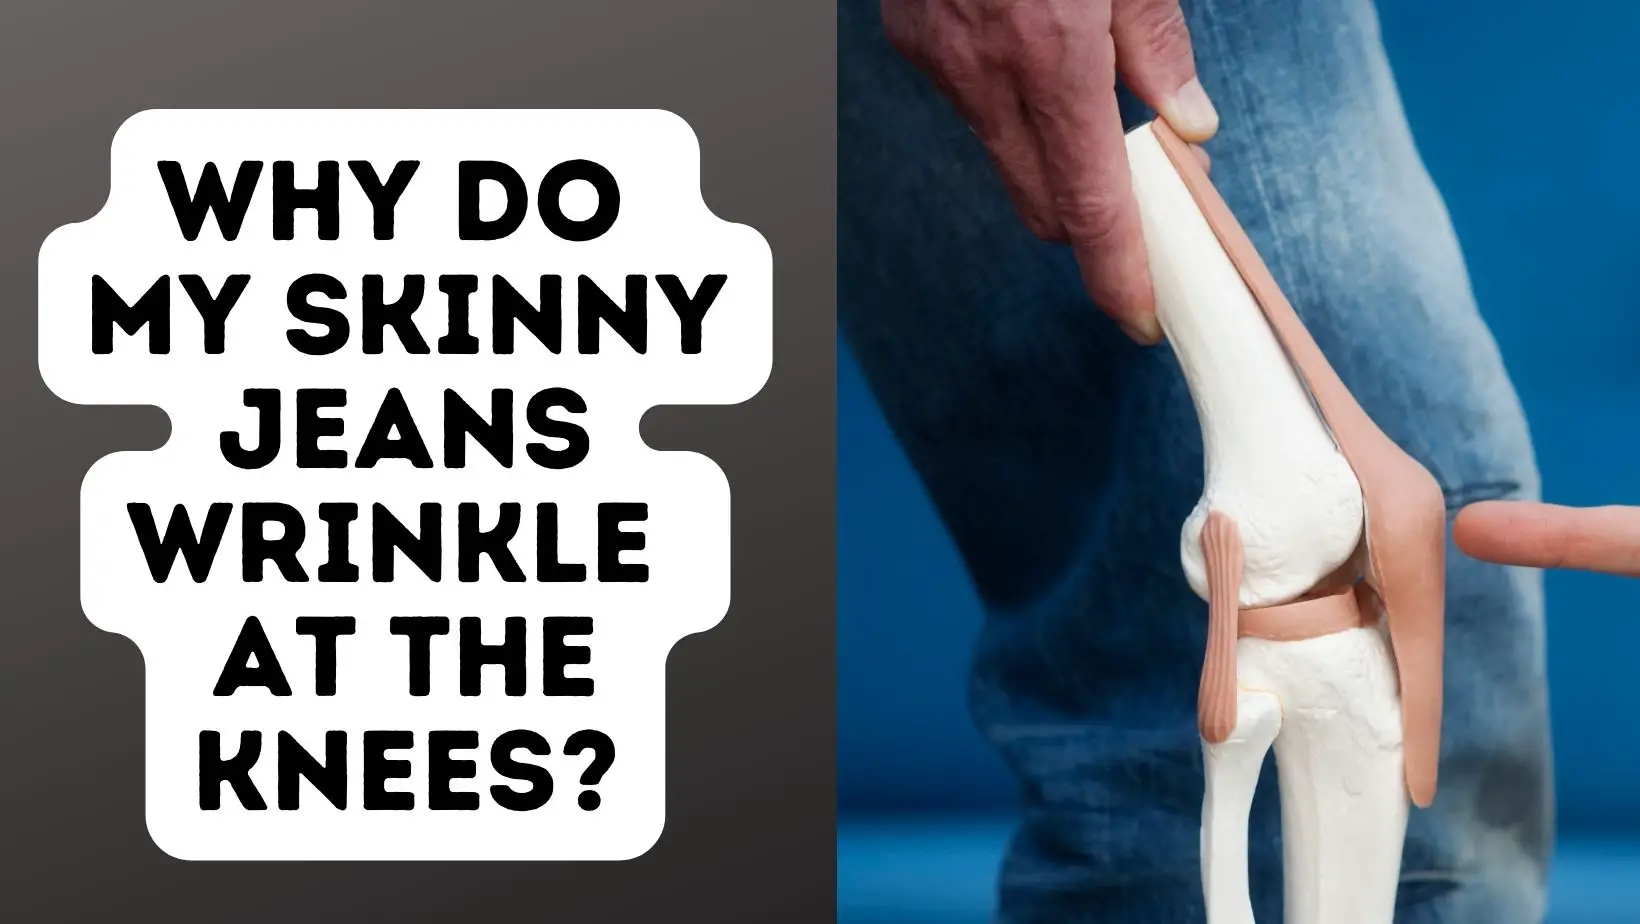 Why Do My Skinny Jeans Wrinkle At The Knees?